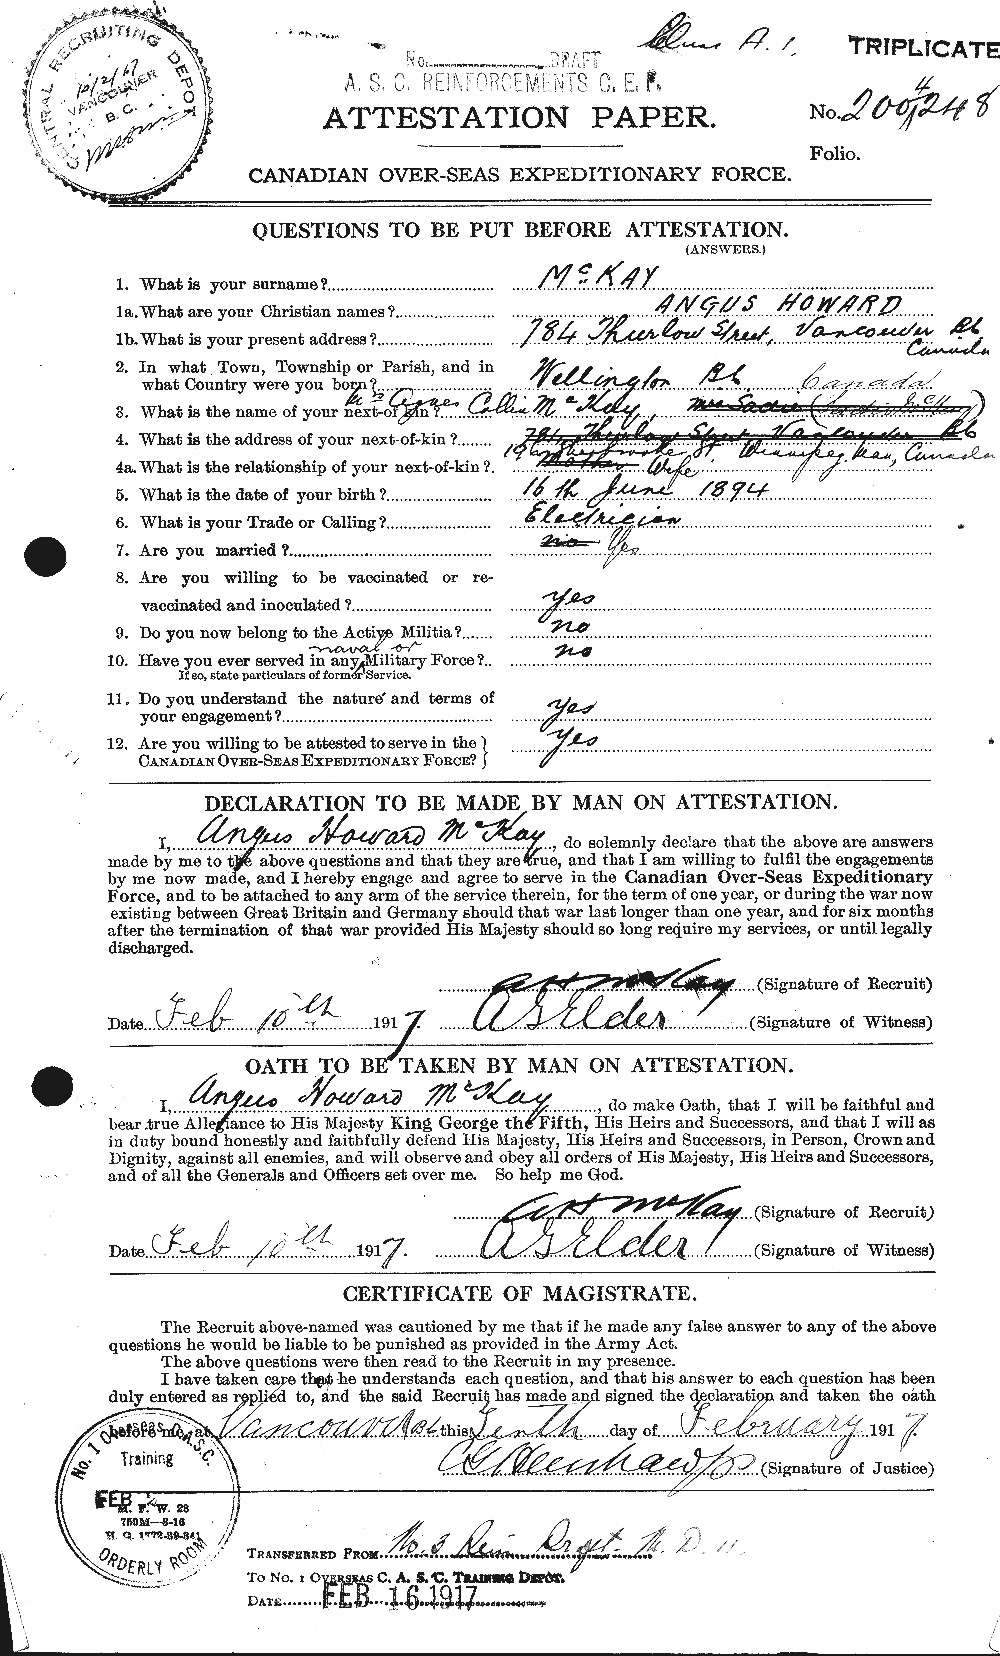 Personnel Records of the First World War - CEF 531004a